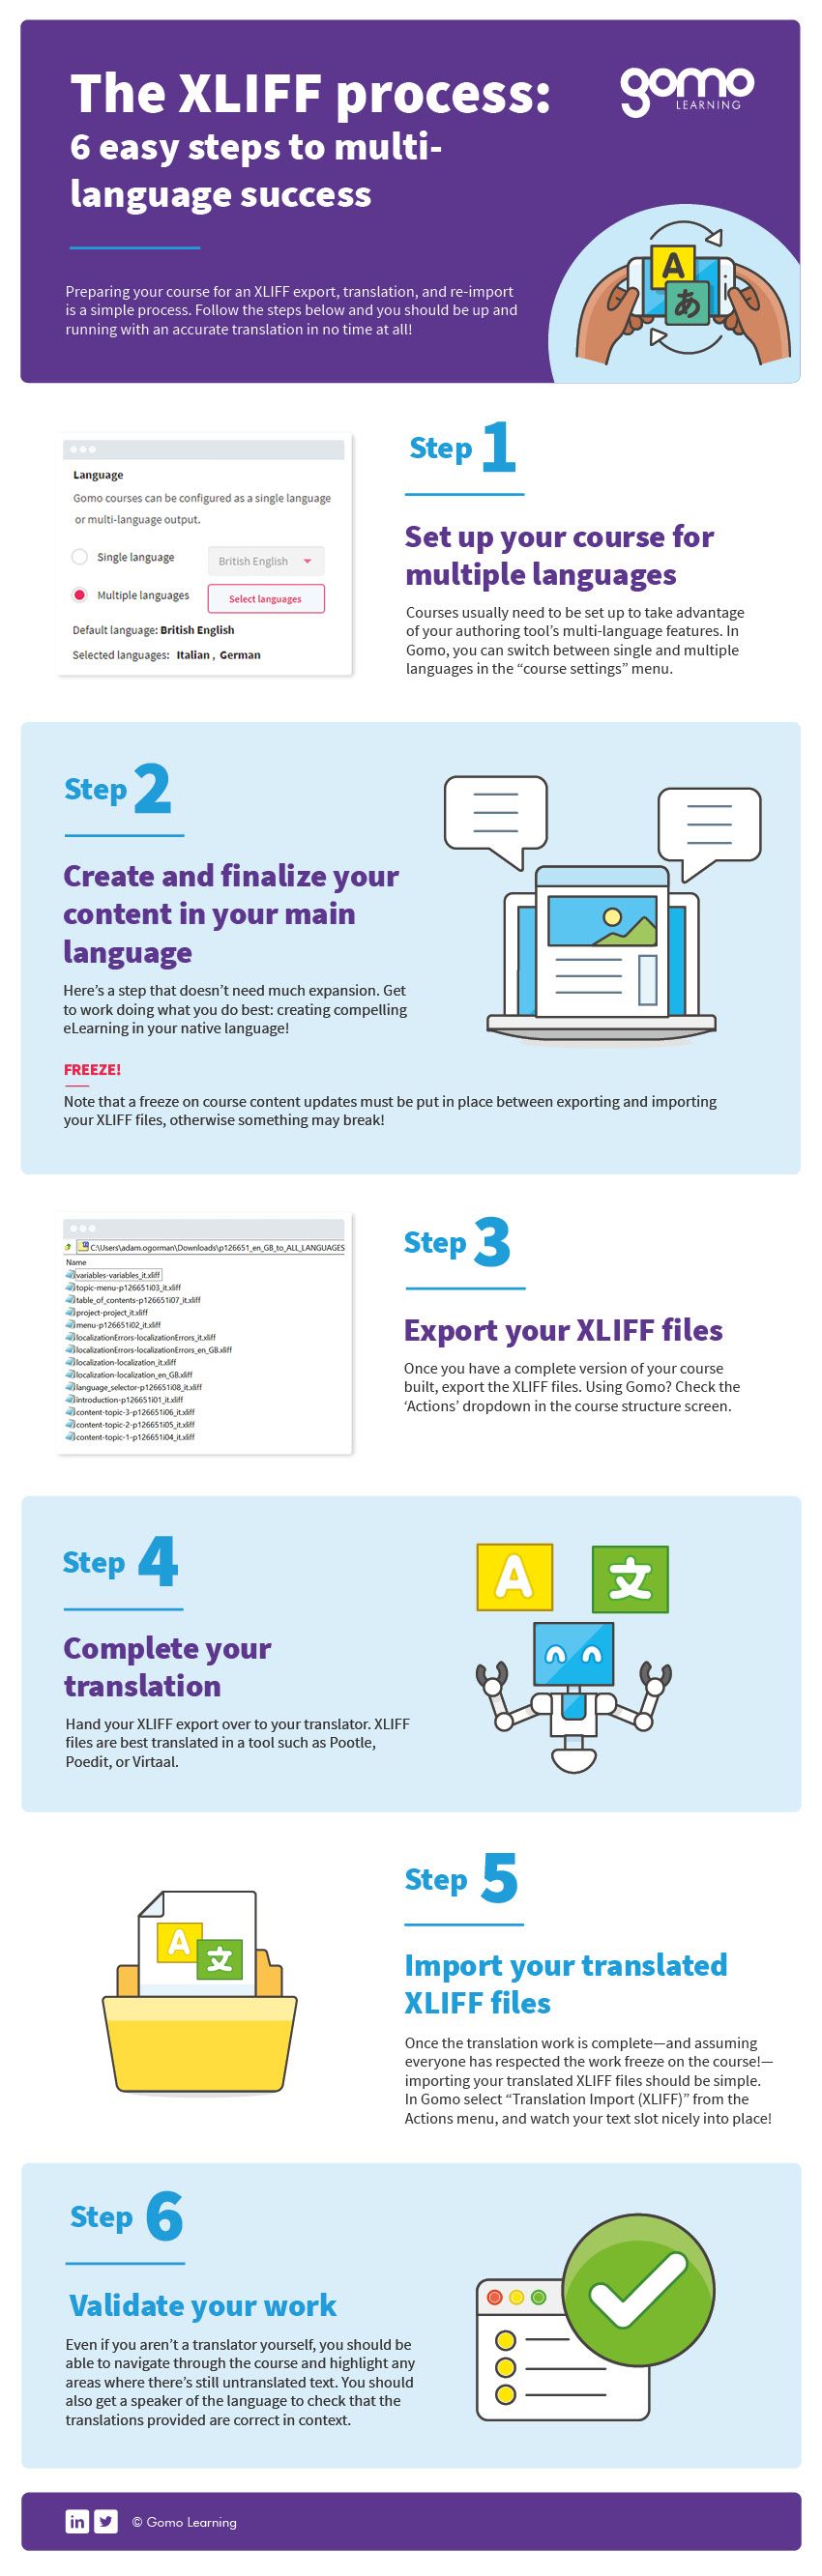 Desktop-sized XLIFF Process infographic: see PDF download for machine readable version.